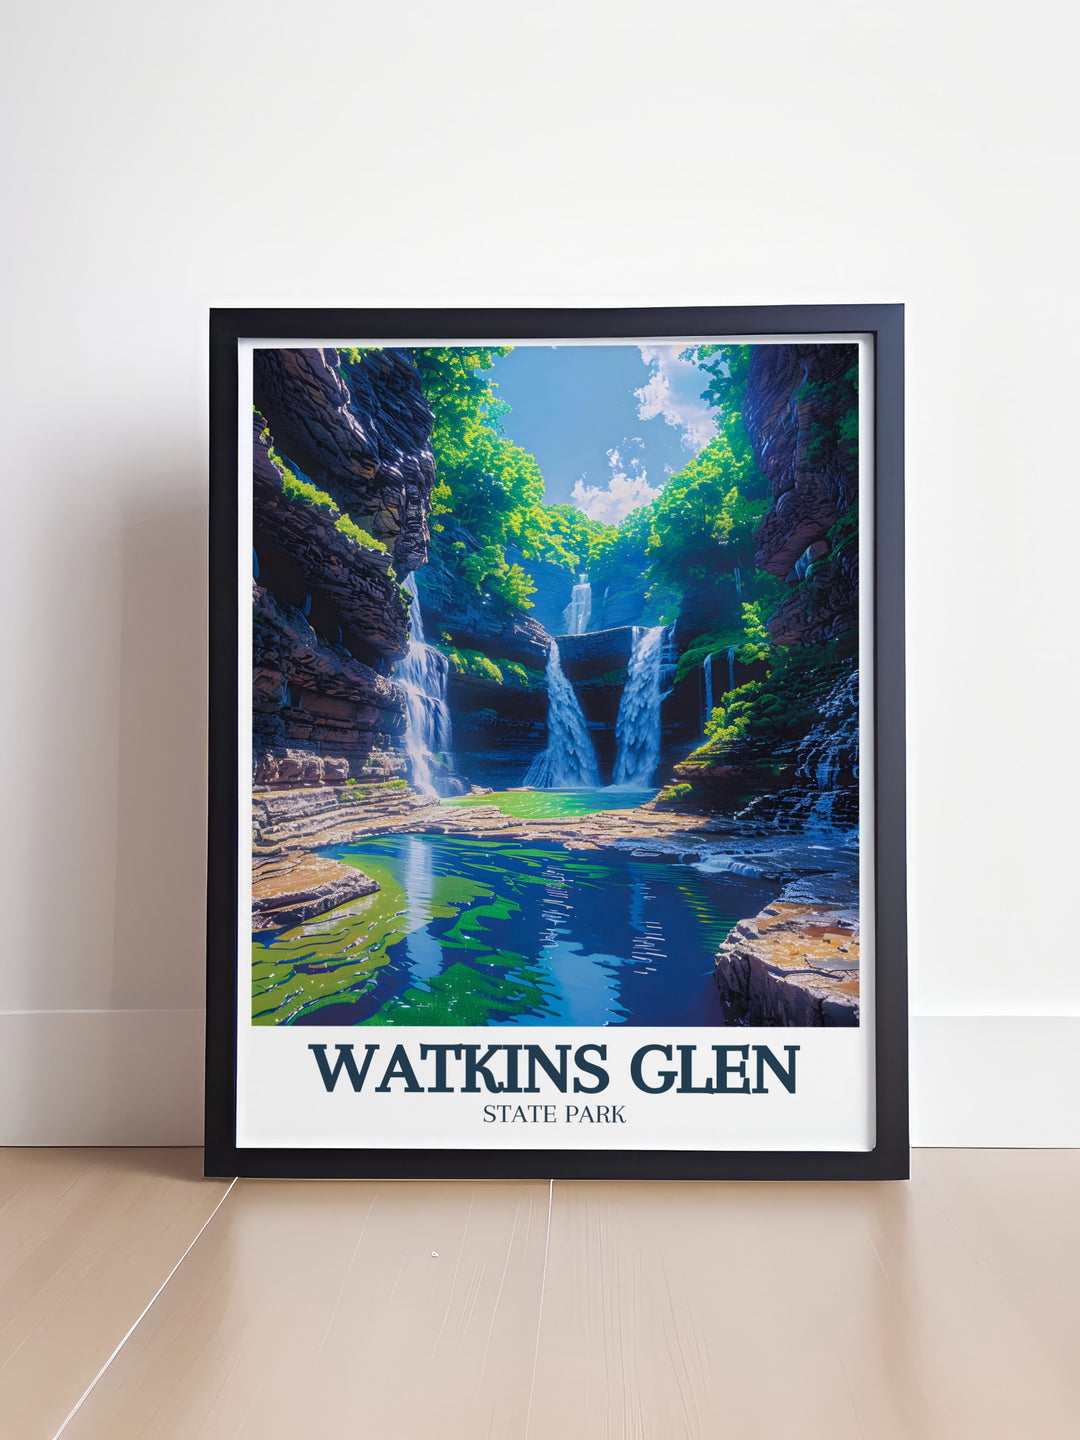 Fine art print of Watkins Glen State Park, showcasing the parks stunning natural waterfalls and lush greenery, perfect for bringing the beauty of New Yorks outdoors into your home.